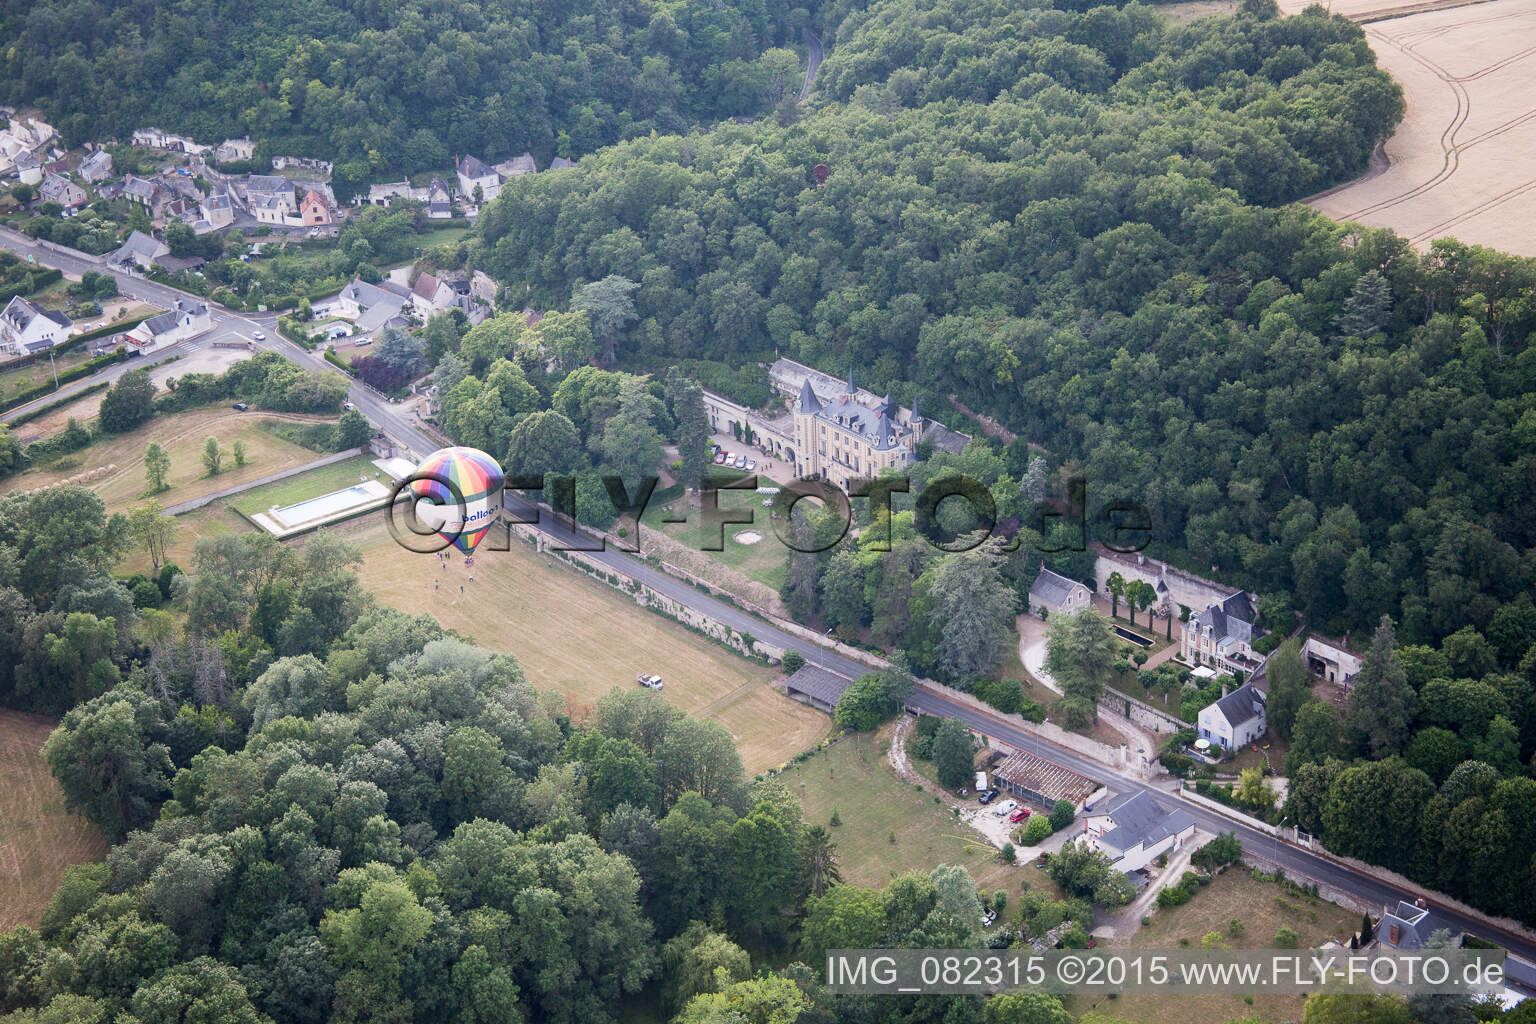 Oblique view of Hot air balloon launch in front of Chateau de Perreux in Nazelles-Negron in Centre-Val de Loire, France